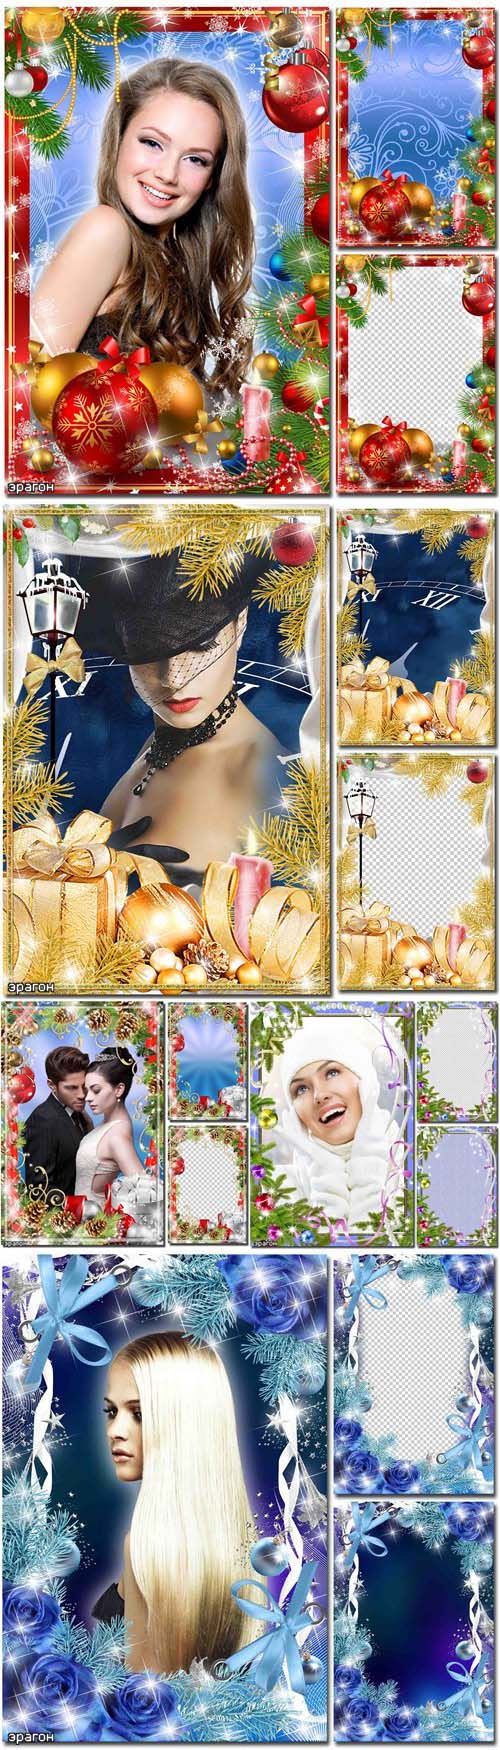 PSD And PNG Frames For Photo - Christmas And New Year 2012 Celebrates part 1 by eragon